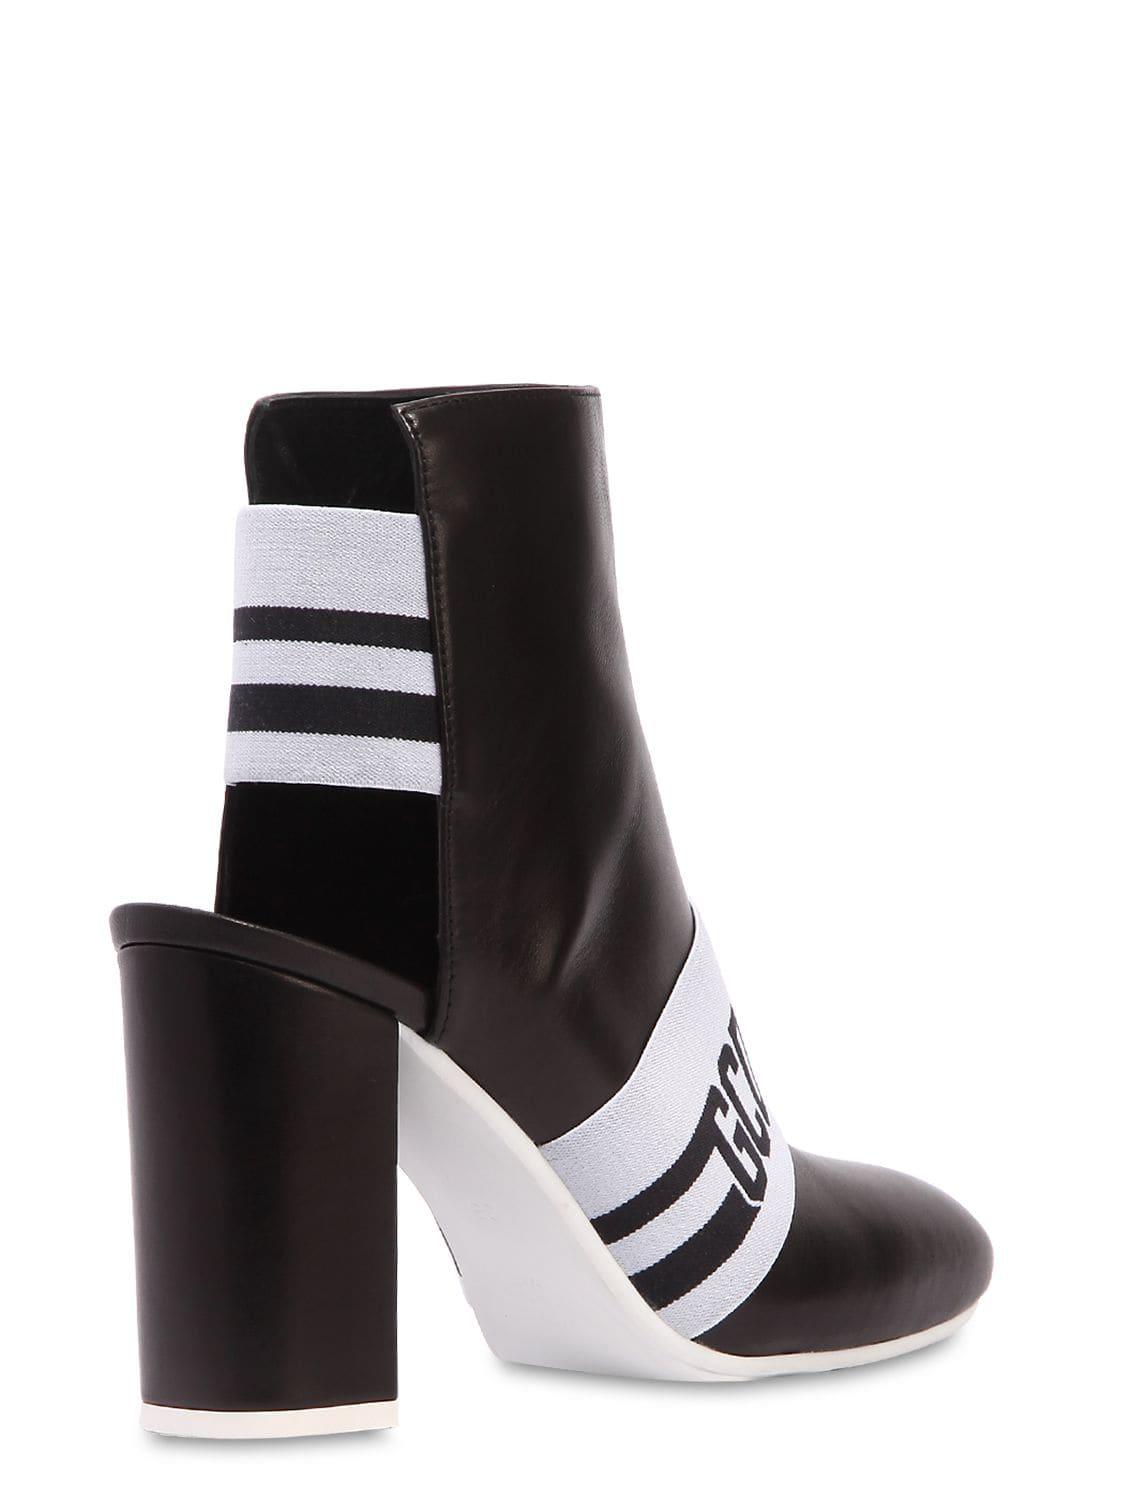 Gcds Boots For Women in White/Red (Black) - Lyst